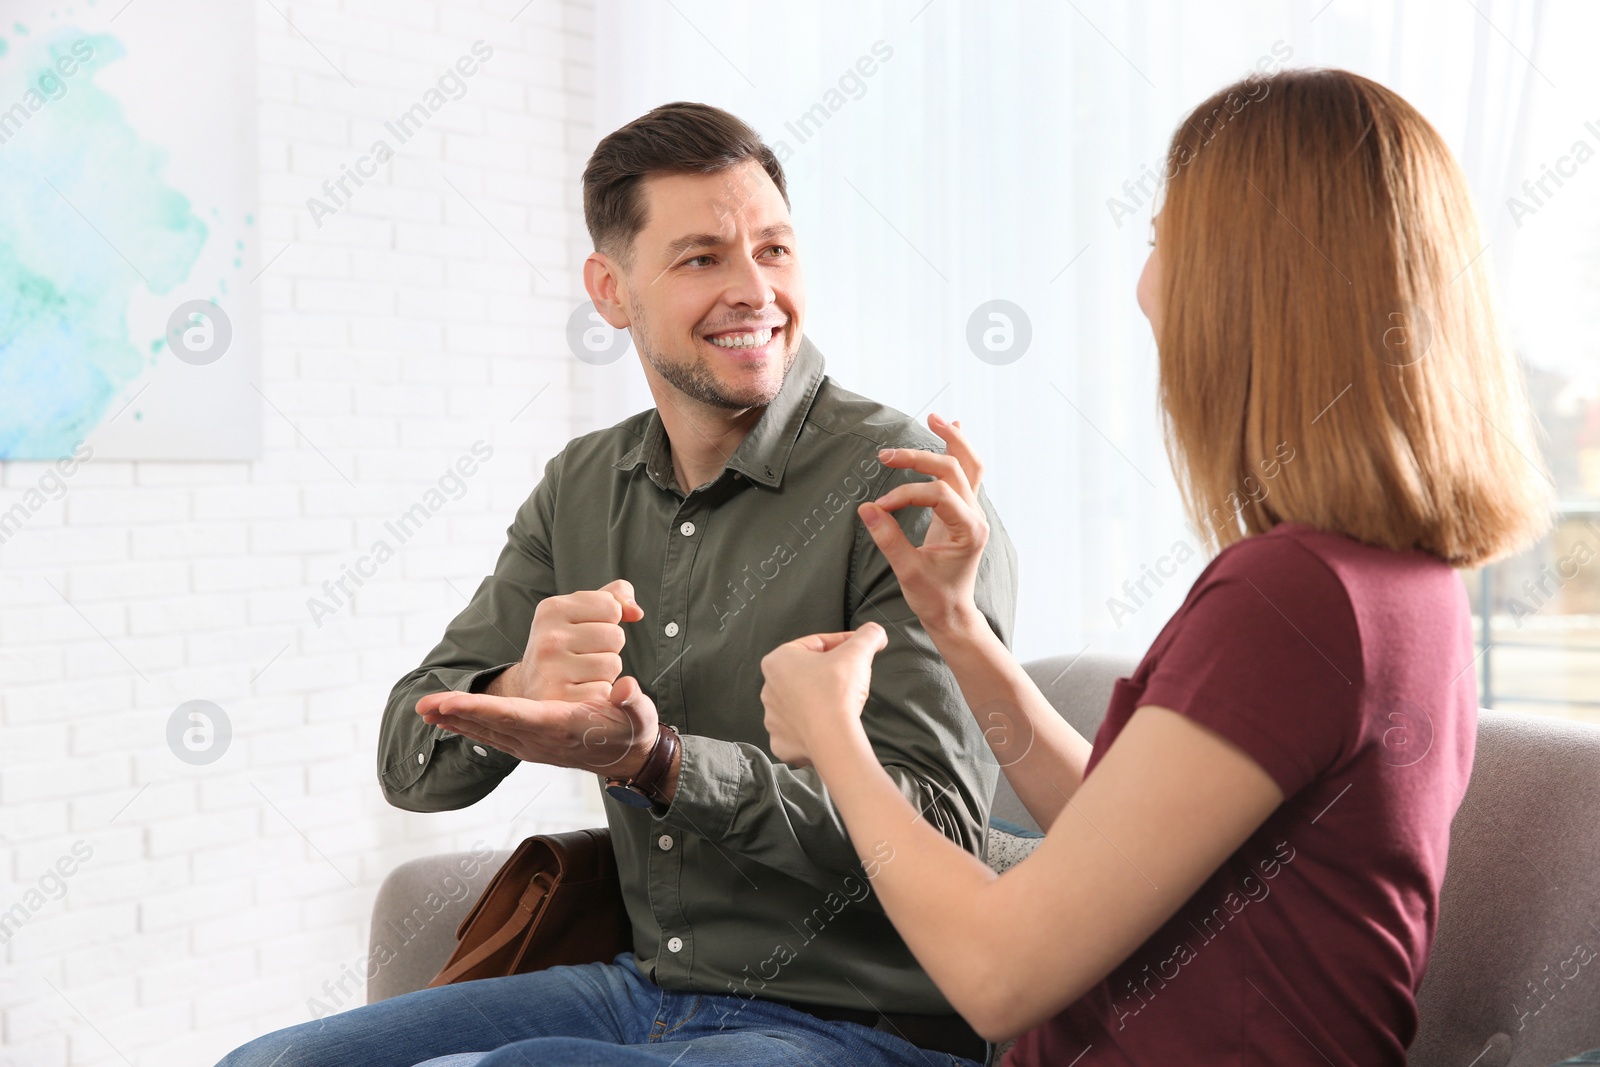 Photo of Hearing impaired friends using sign language for communication on sofa in living room